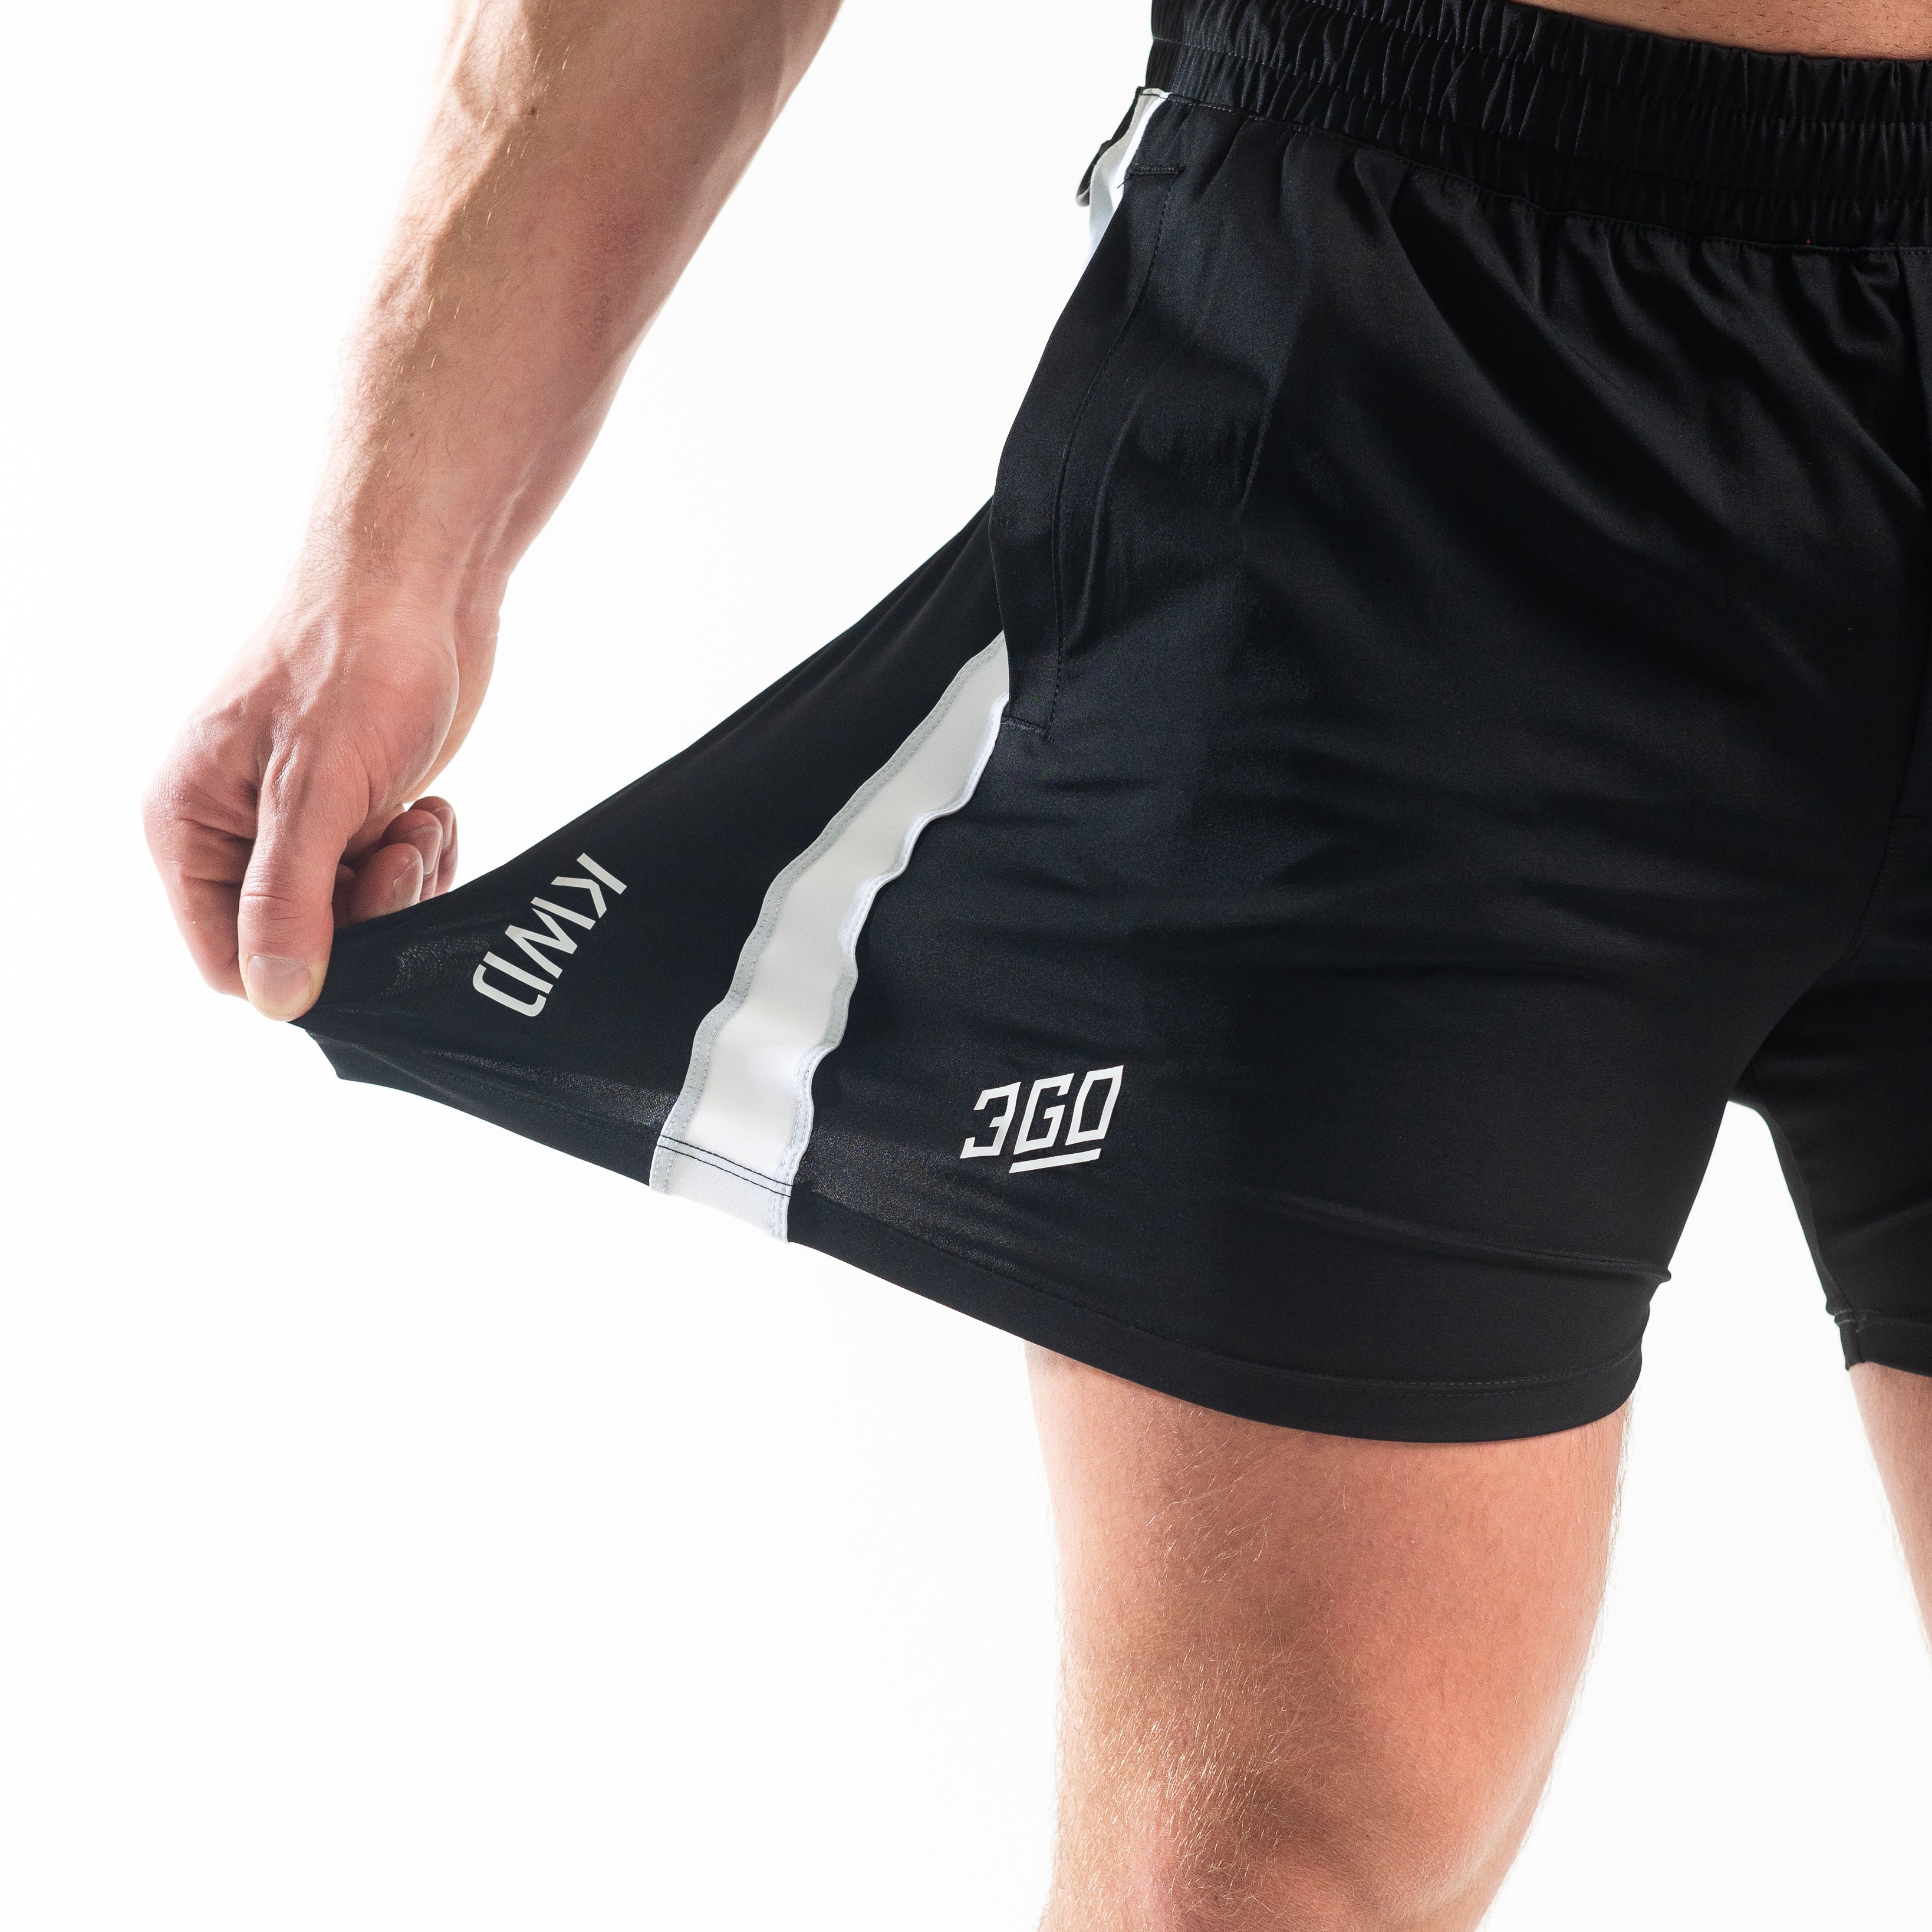 360GO was created to provide the flexibility for all movements in your training while offering comfort. These shorts offer 360 degrees of stretch in all angles and allow you to remain comfortable without limiting any movement in both training and life environments. Designed with a wide drawstring to easily adjust your waist without slipping. Purchase 360GO Domino Squat Shorts from A7 UK. All A7 Powerlifting Equipment shipping to UK, Norway, Switzerland and Iceland.